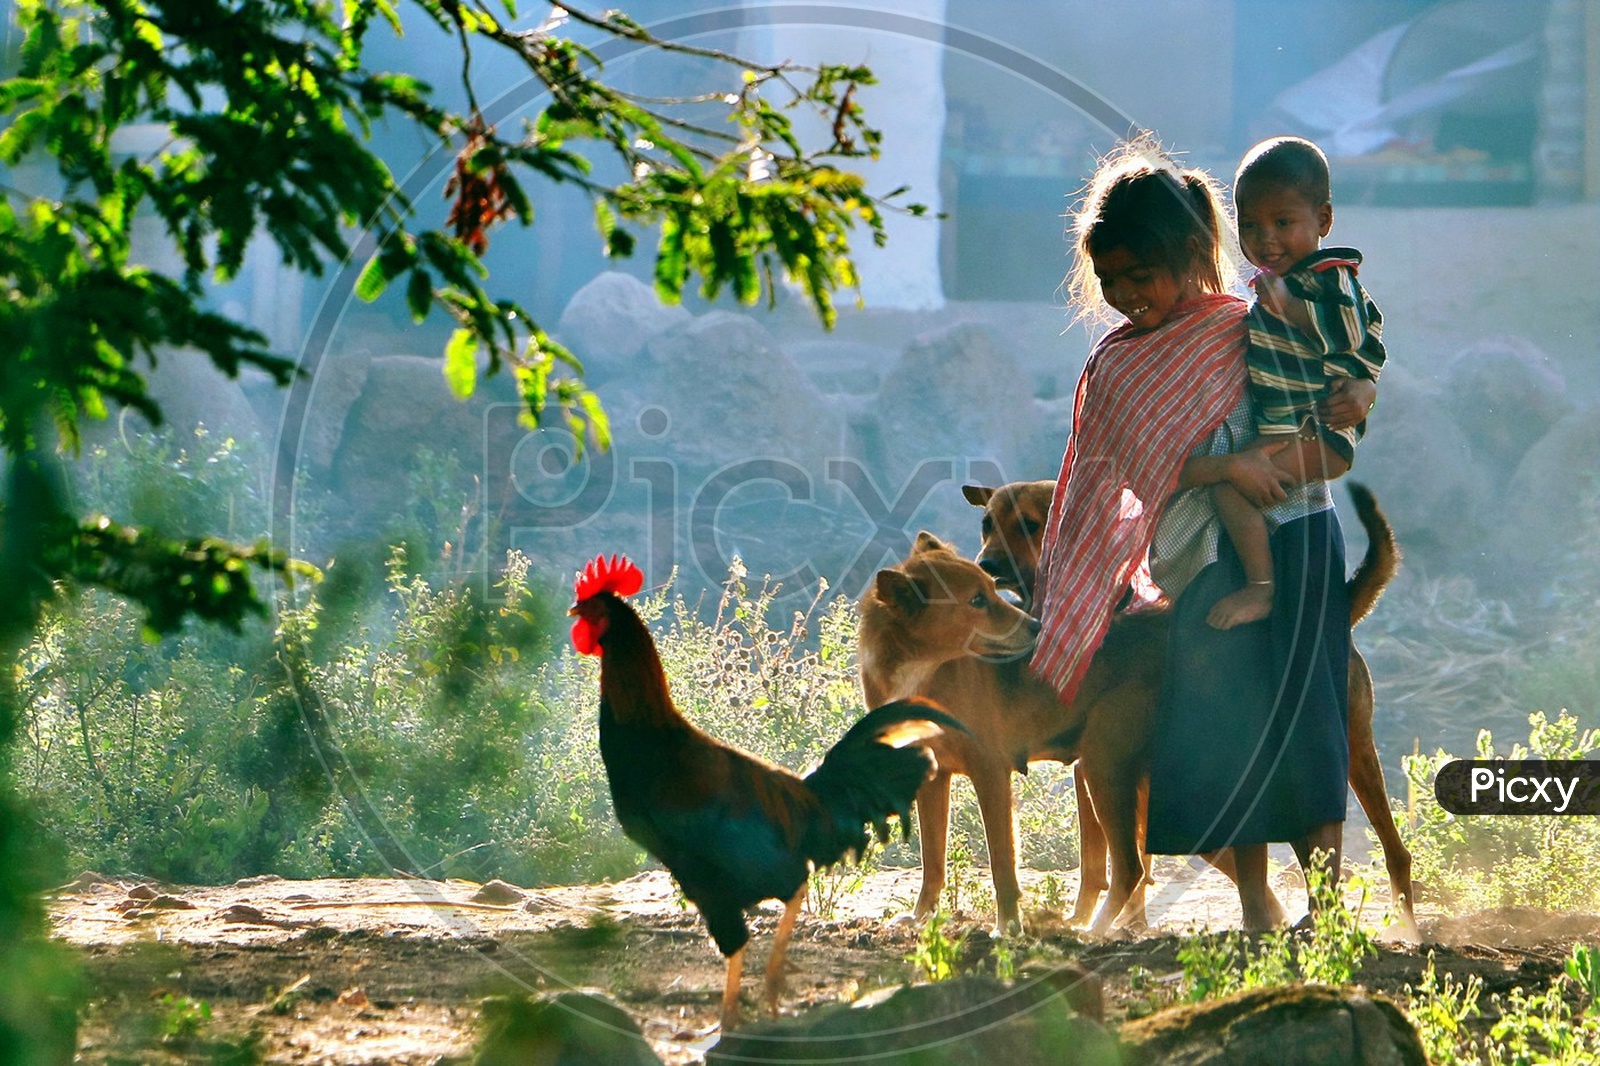 Tribal kids playing with the dogs and cock